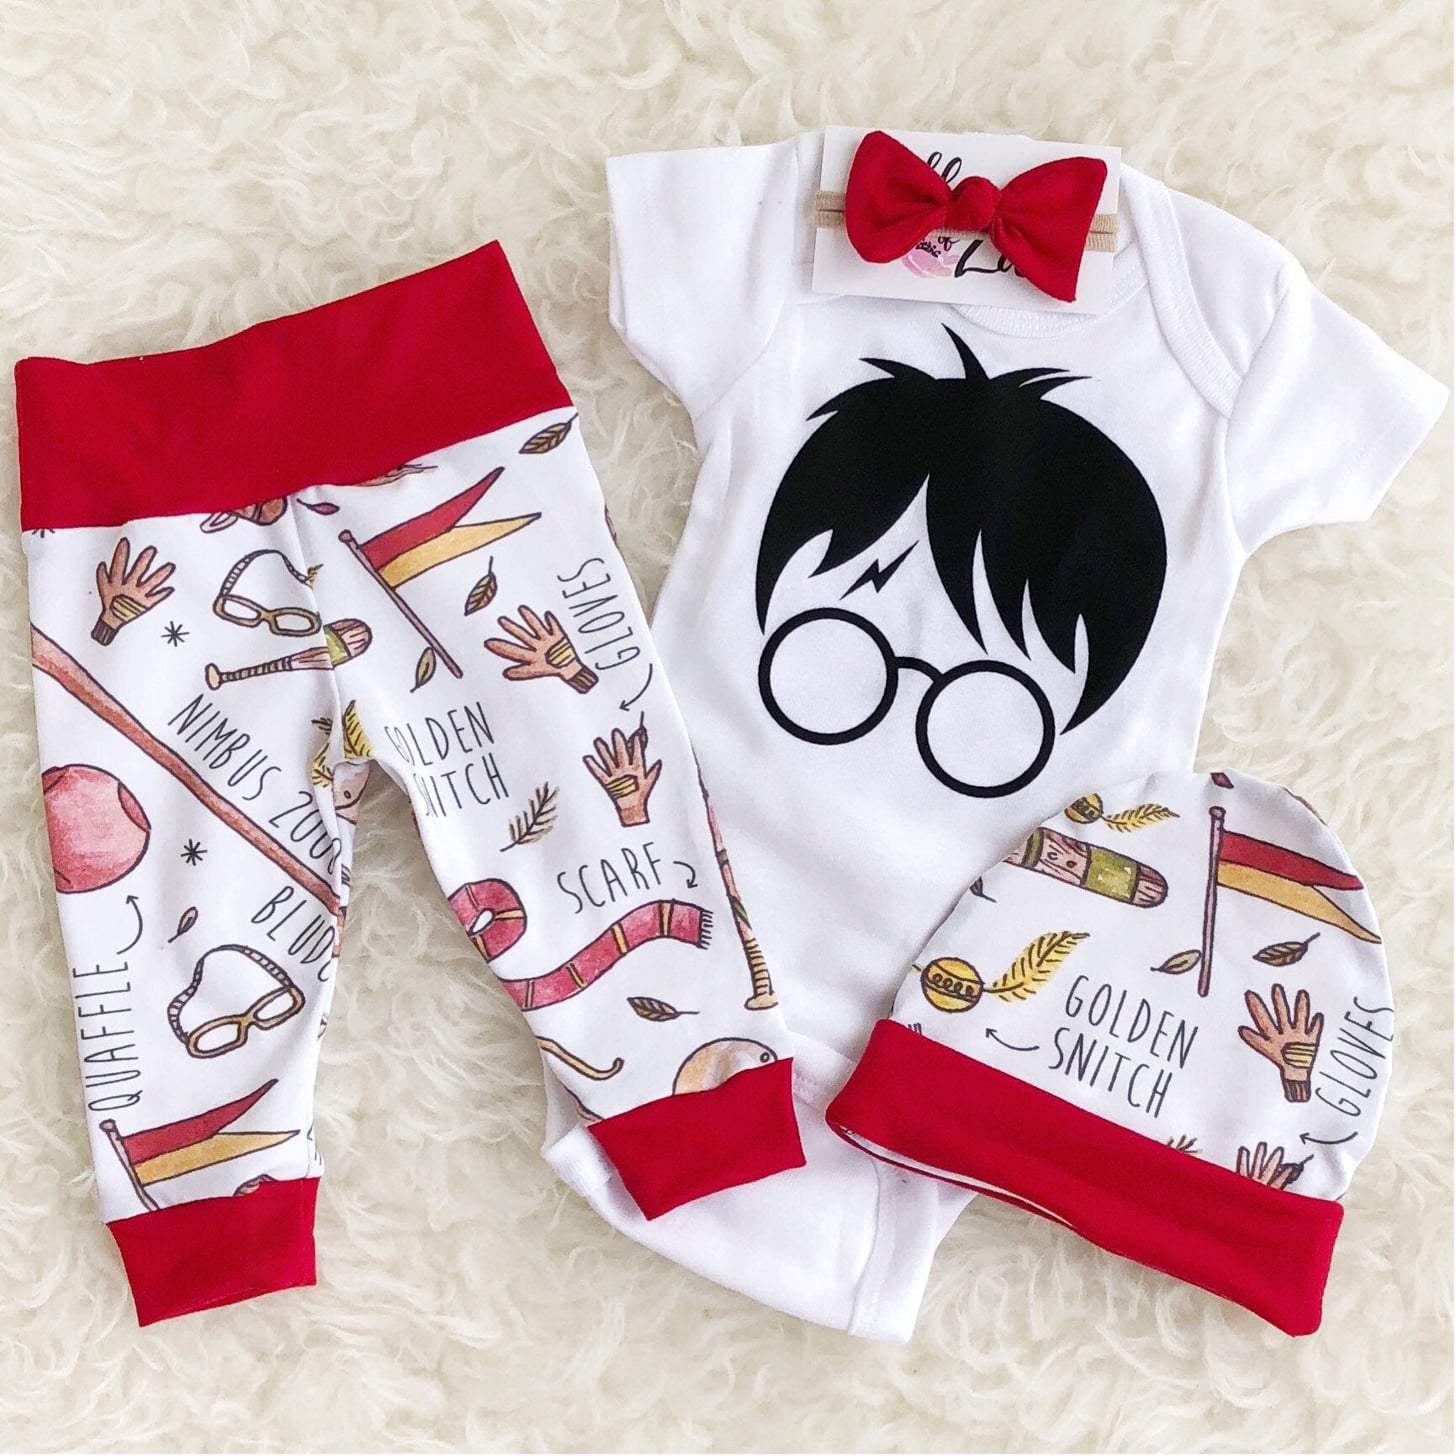 Magical Harry Potter Baby Shower Decorations